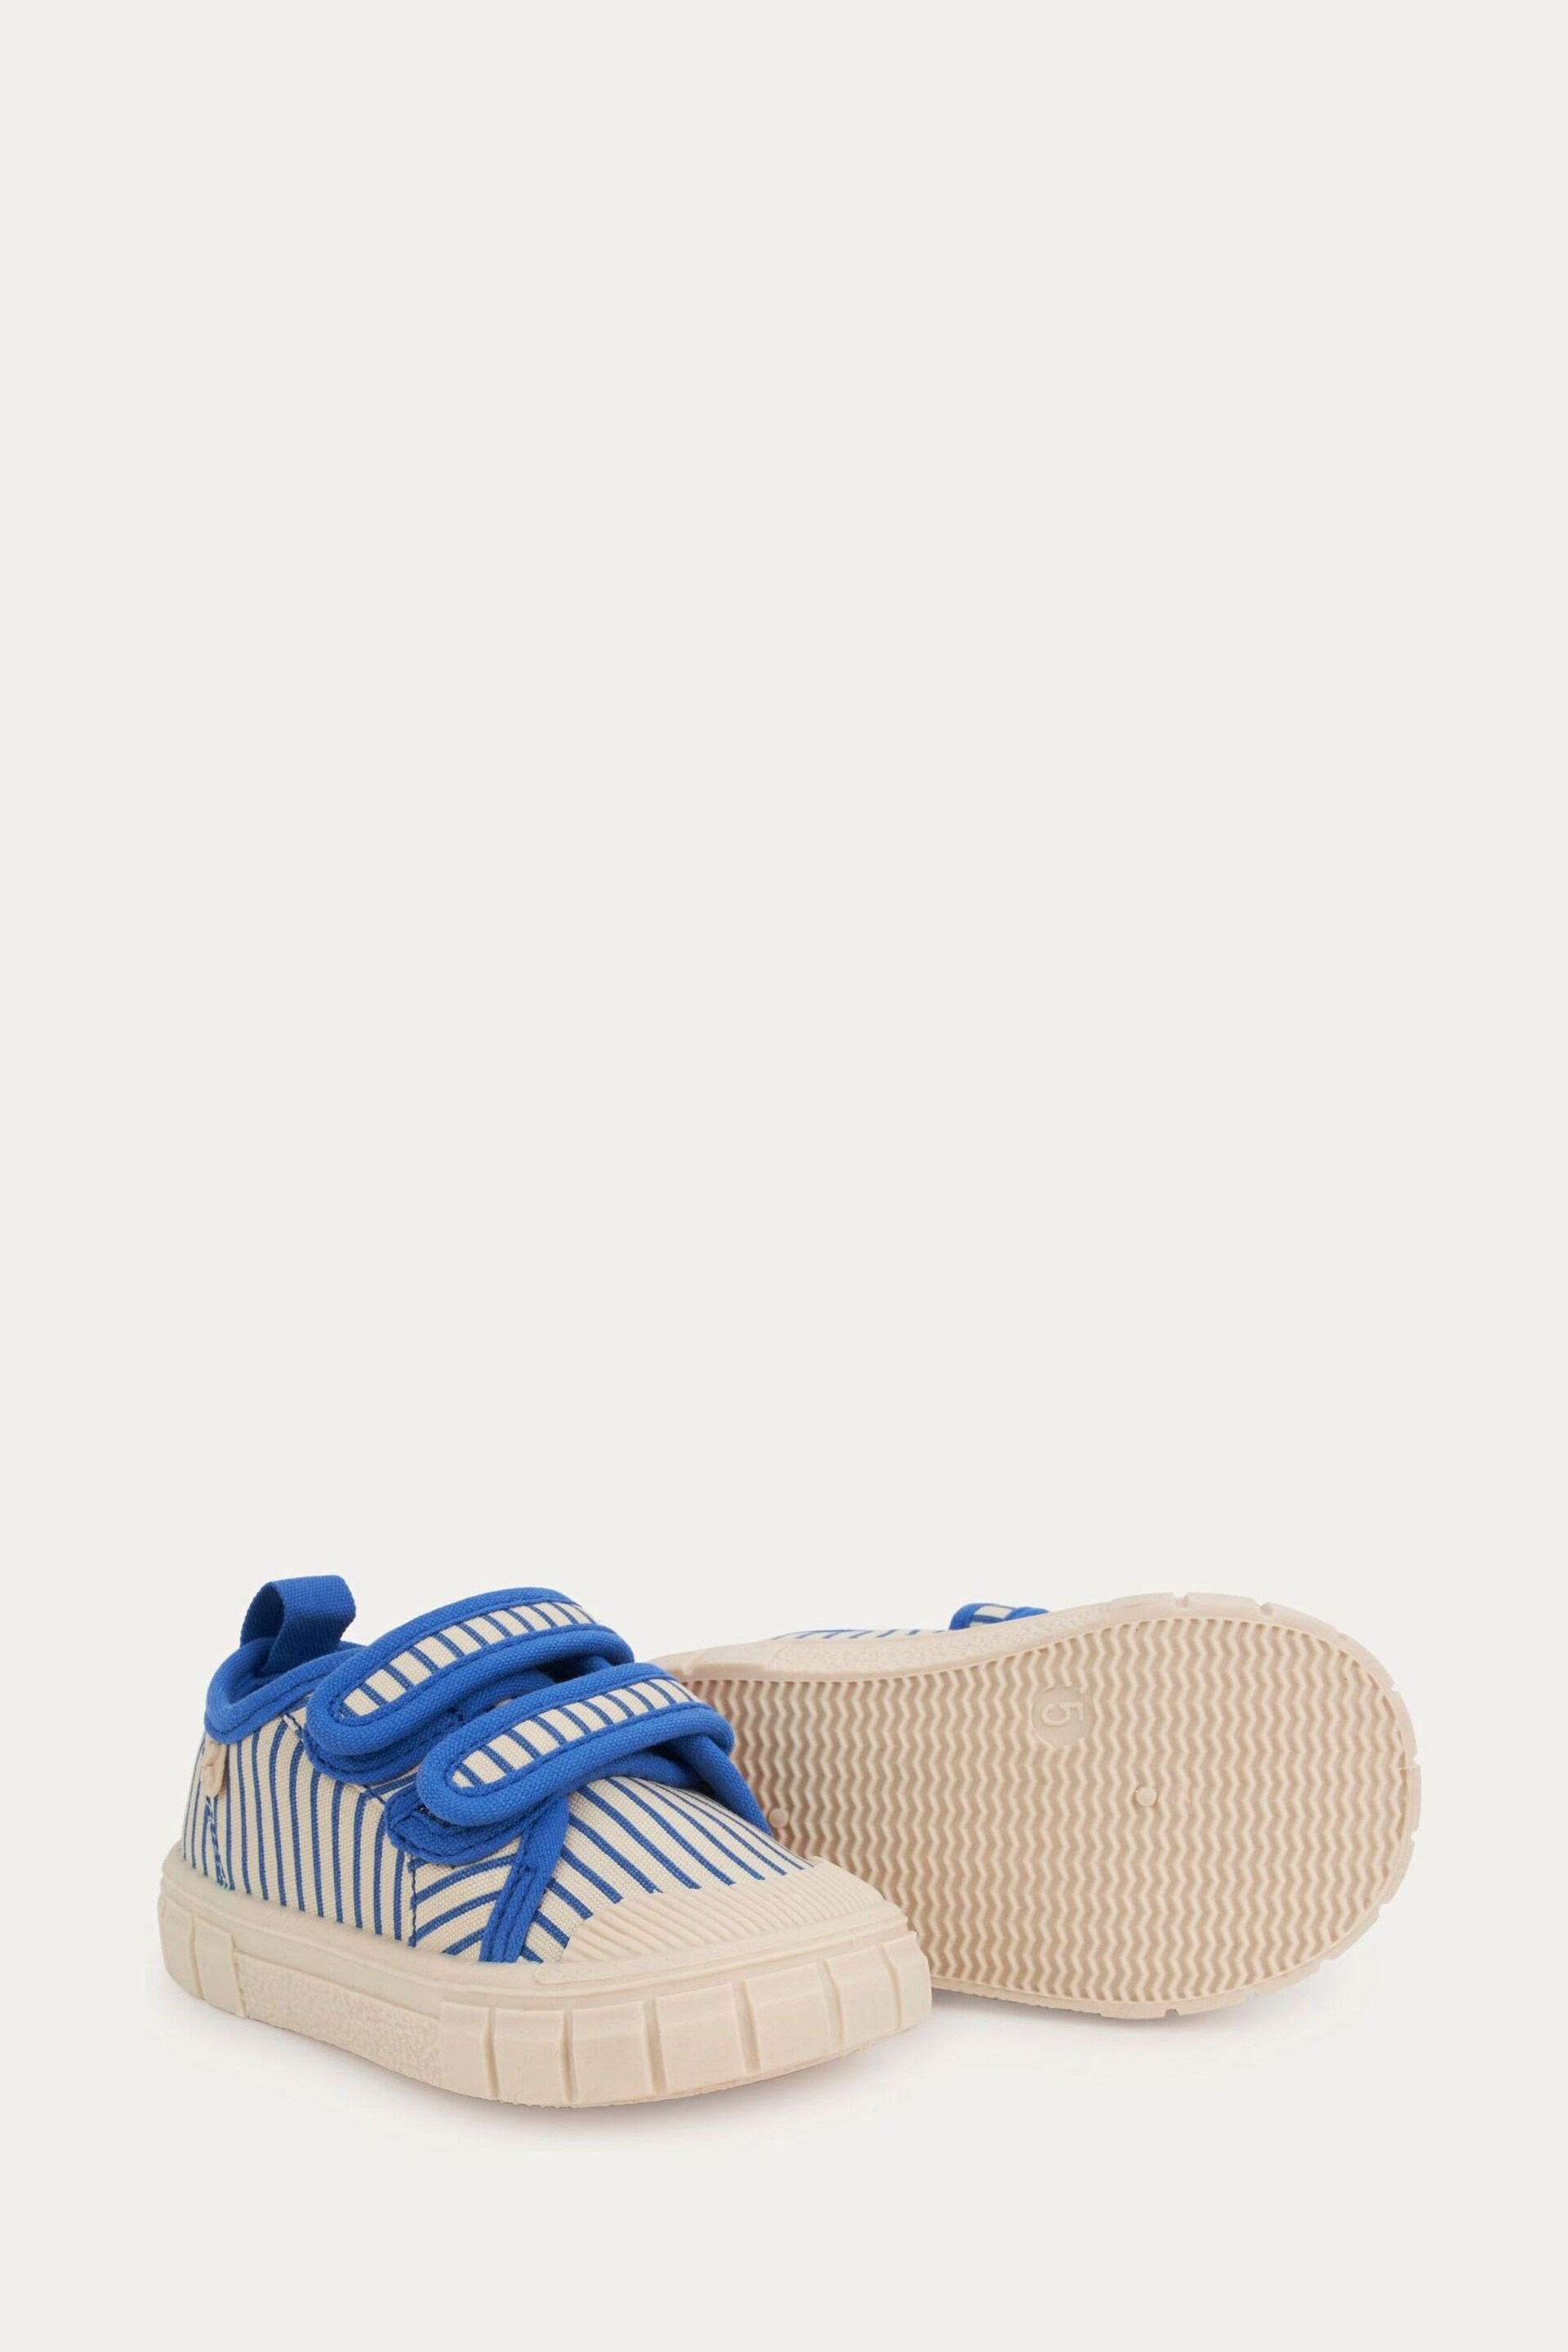 KIDLY Stripe Canvas Trainers - Image 4 of 4